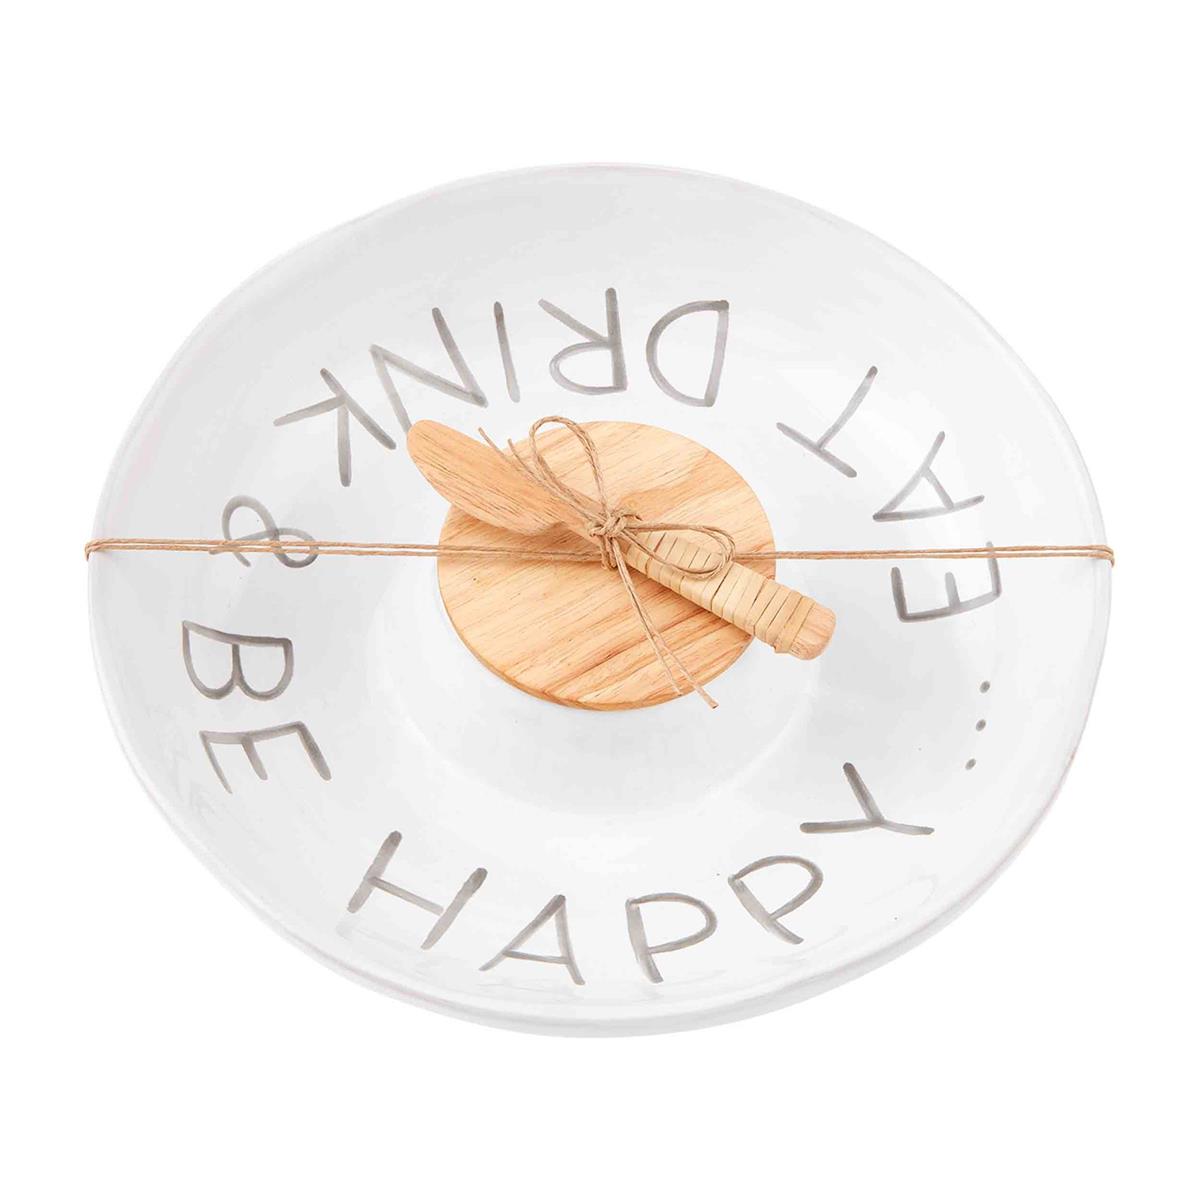 happy chip and dip with spreader tied together with twine on a white background